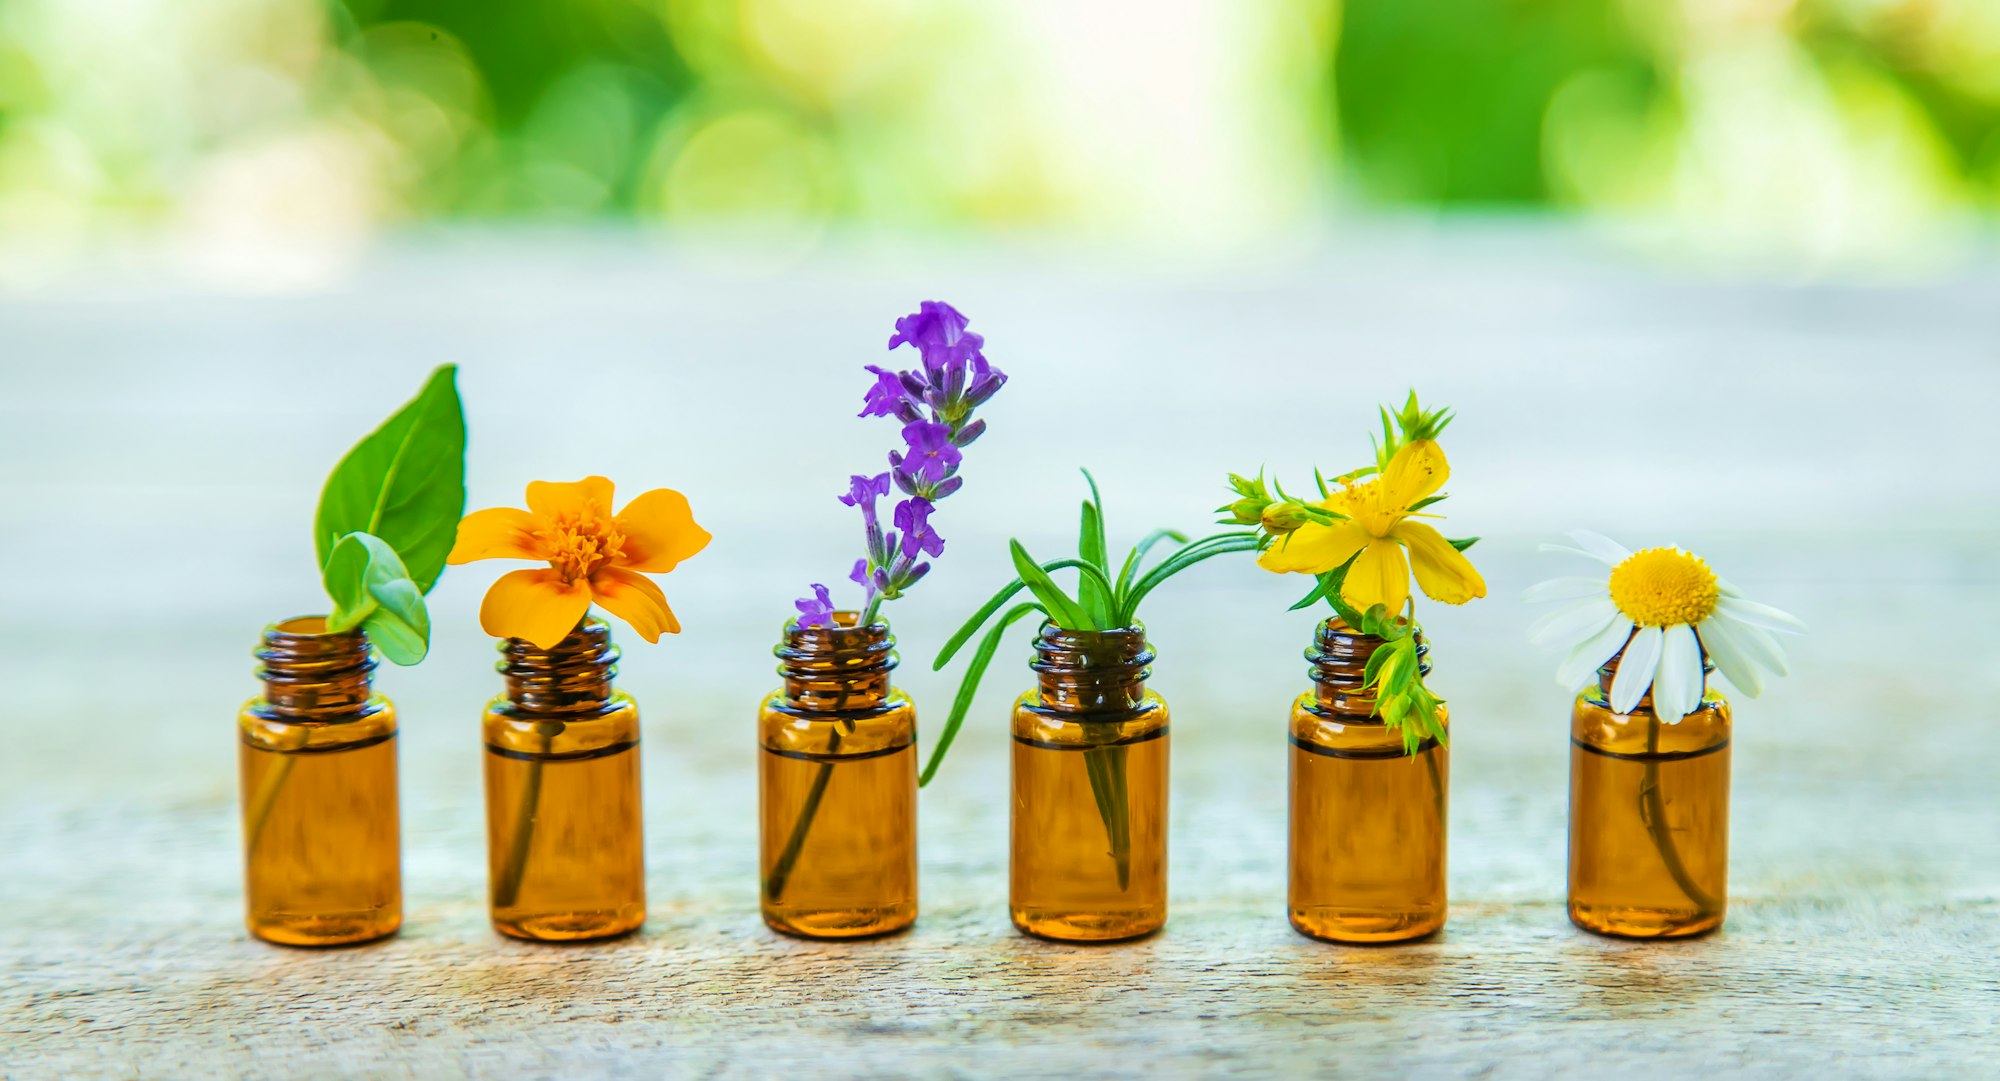 Essential oils and herbal extracts in small bottles. Selective focus.